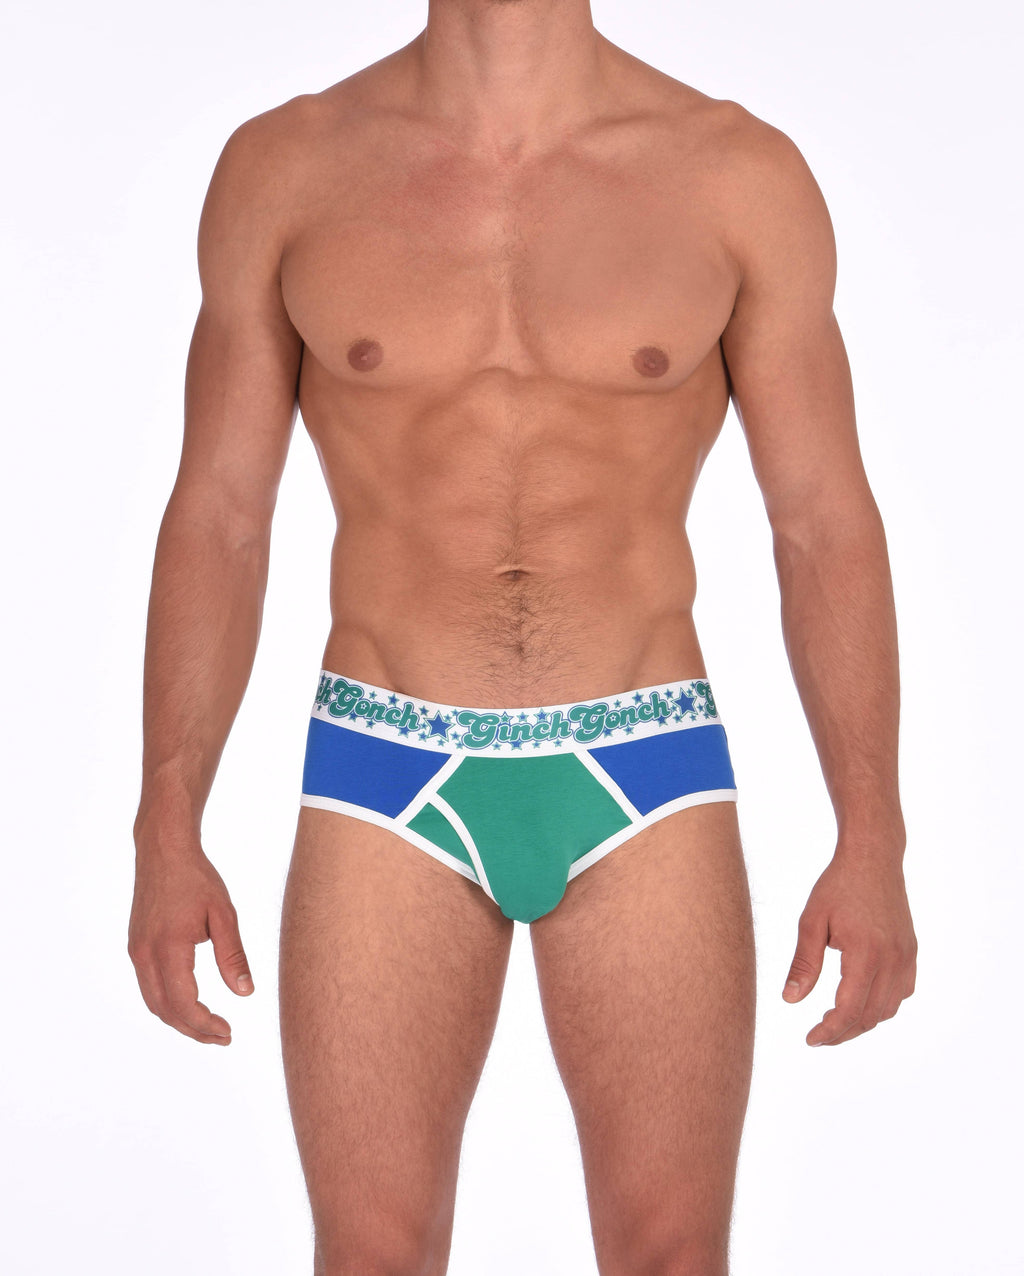 Ginch Gonch Blue Lagoon men's low rise briefs y front blue and green. panels with white trim and printed waistband